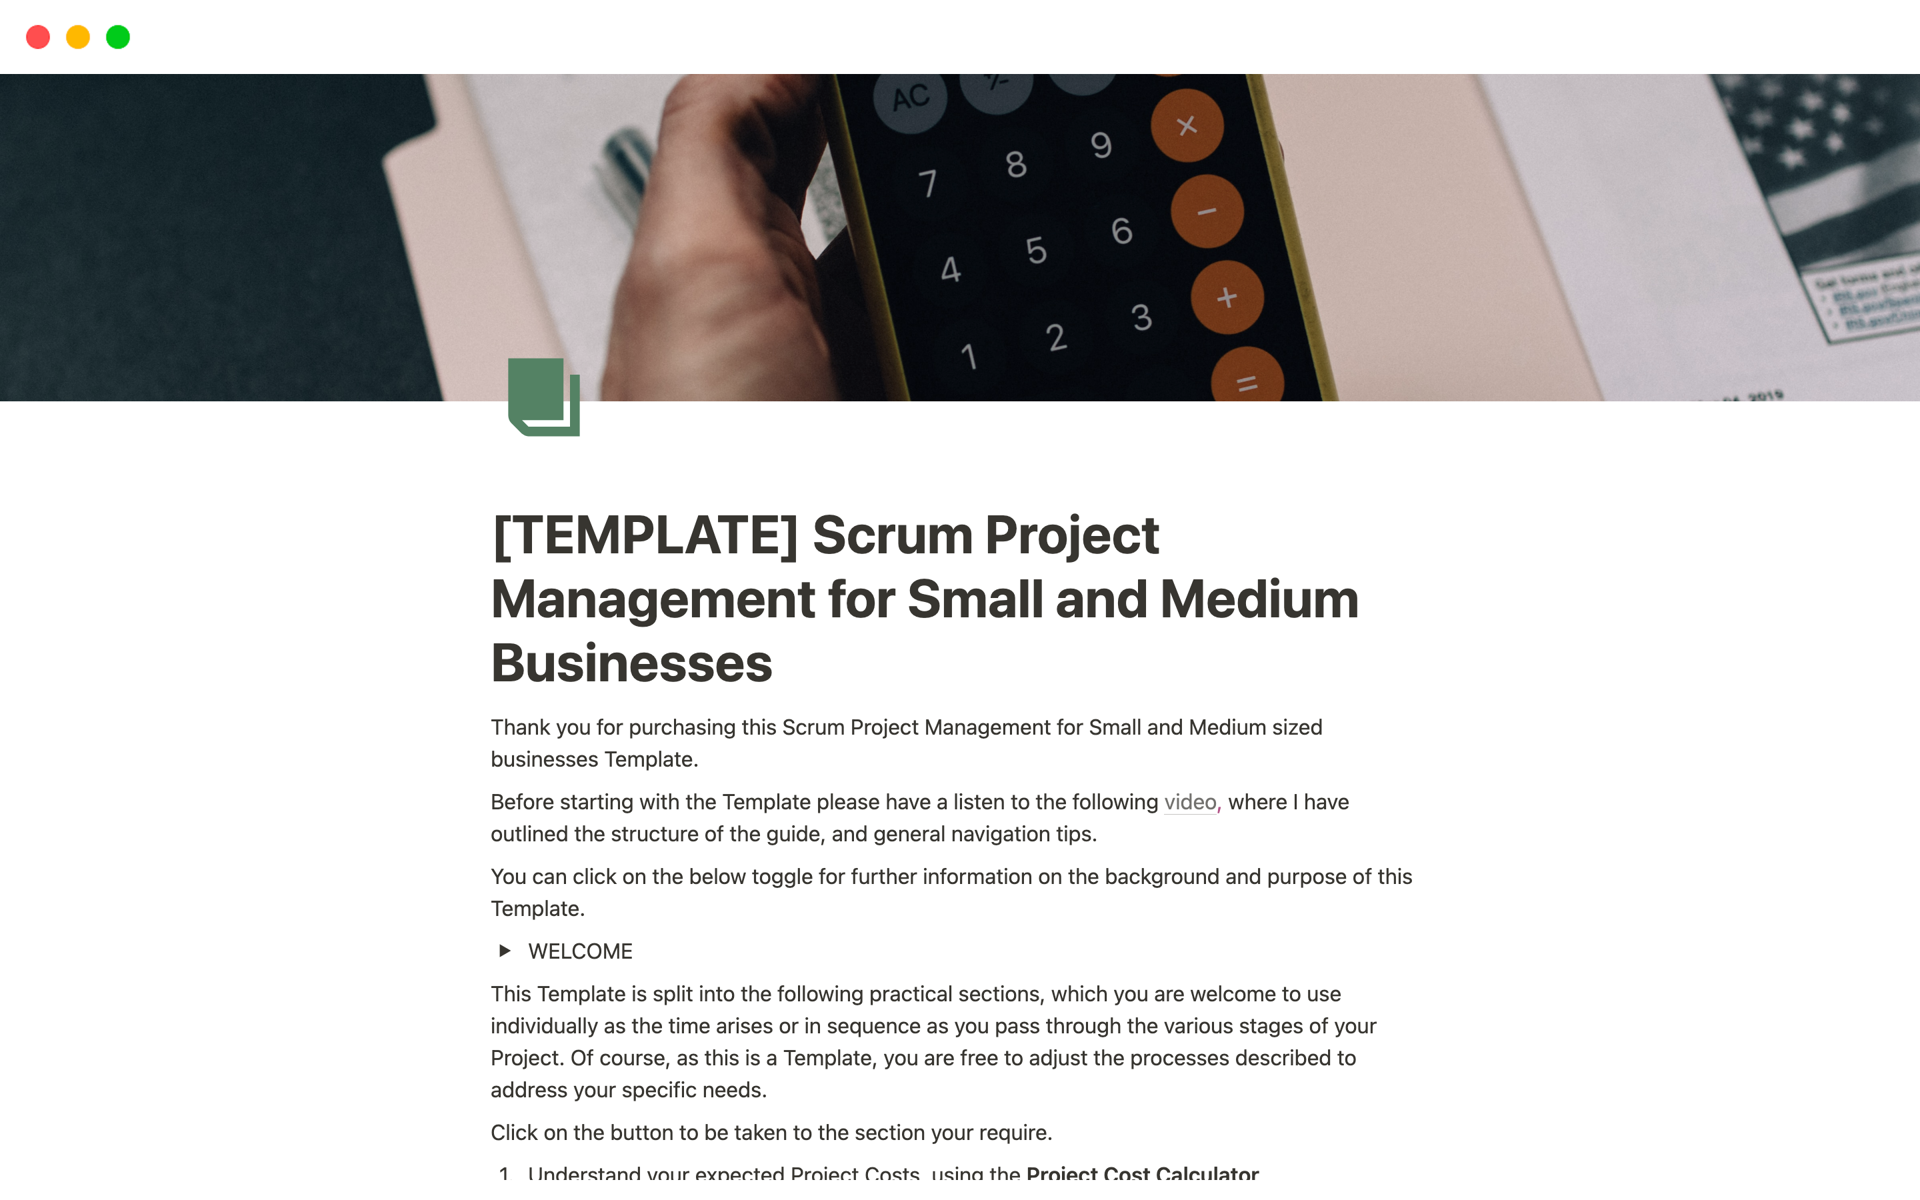 The Scrum Project Management guide for Small and Medium Businesses is a Notion Template for your business to help you to build Software Products (mobile apps, web apps, enterprise software products), based on the Scrum framework, more efficiently.